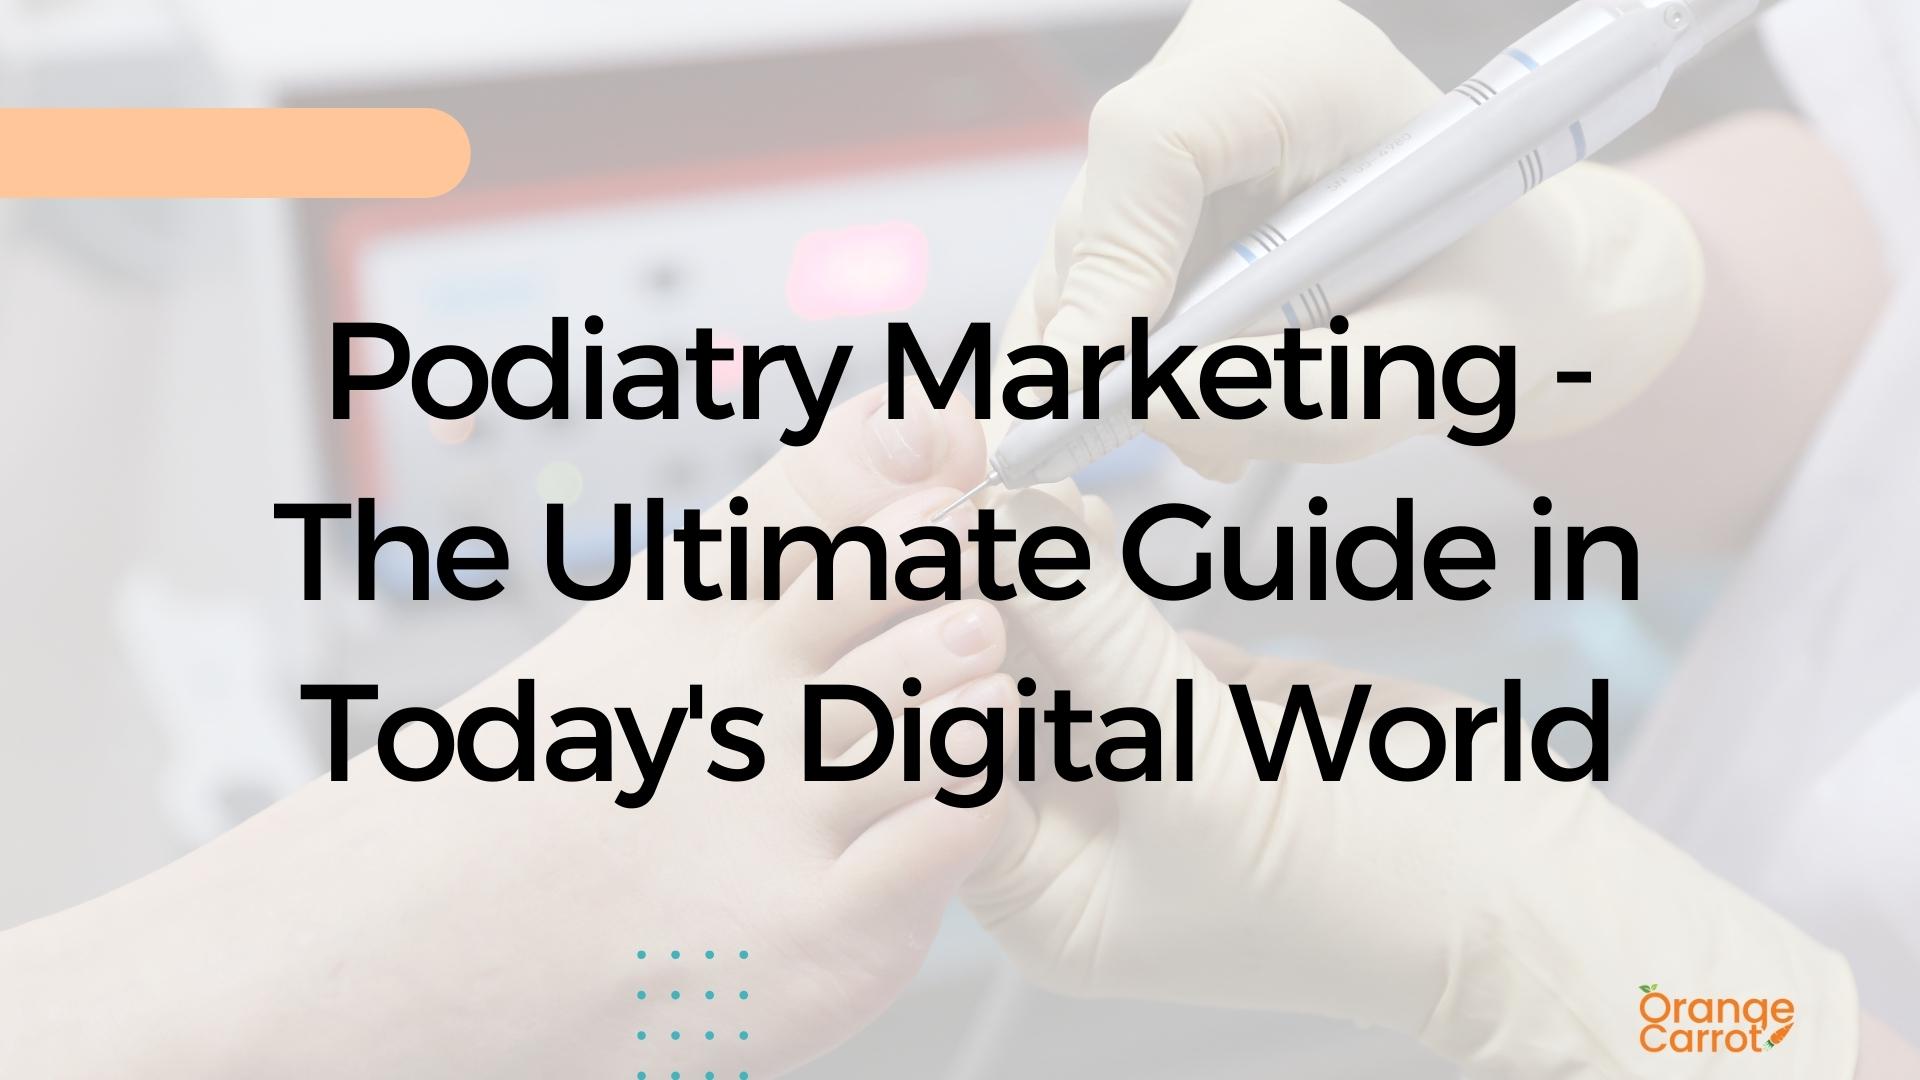 Podiatry Marketing - The Ultimate Guide in Today's Digital World